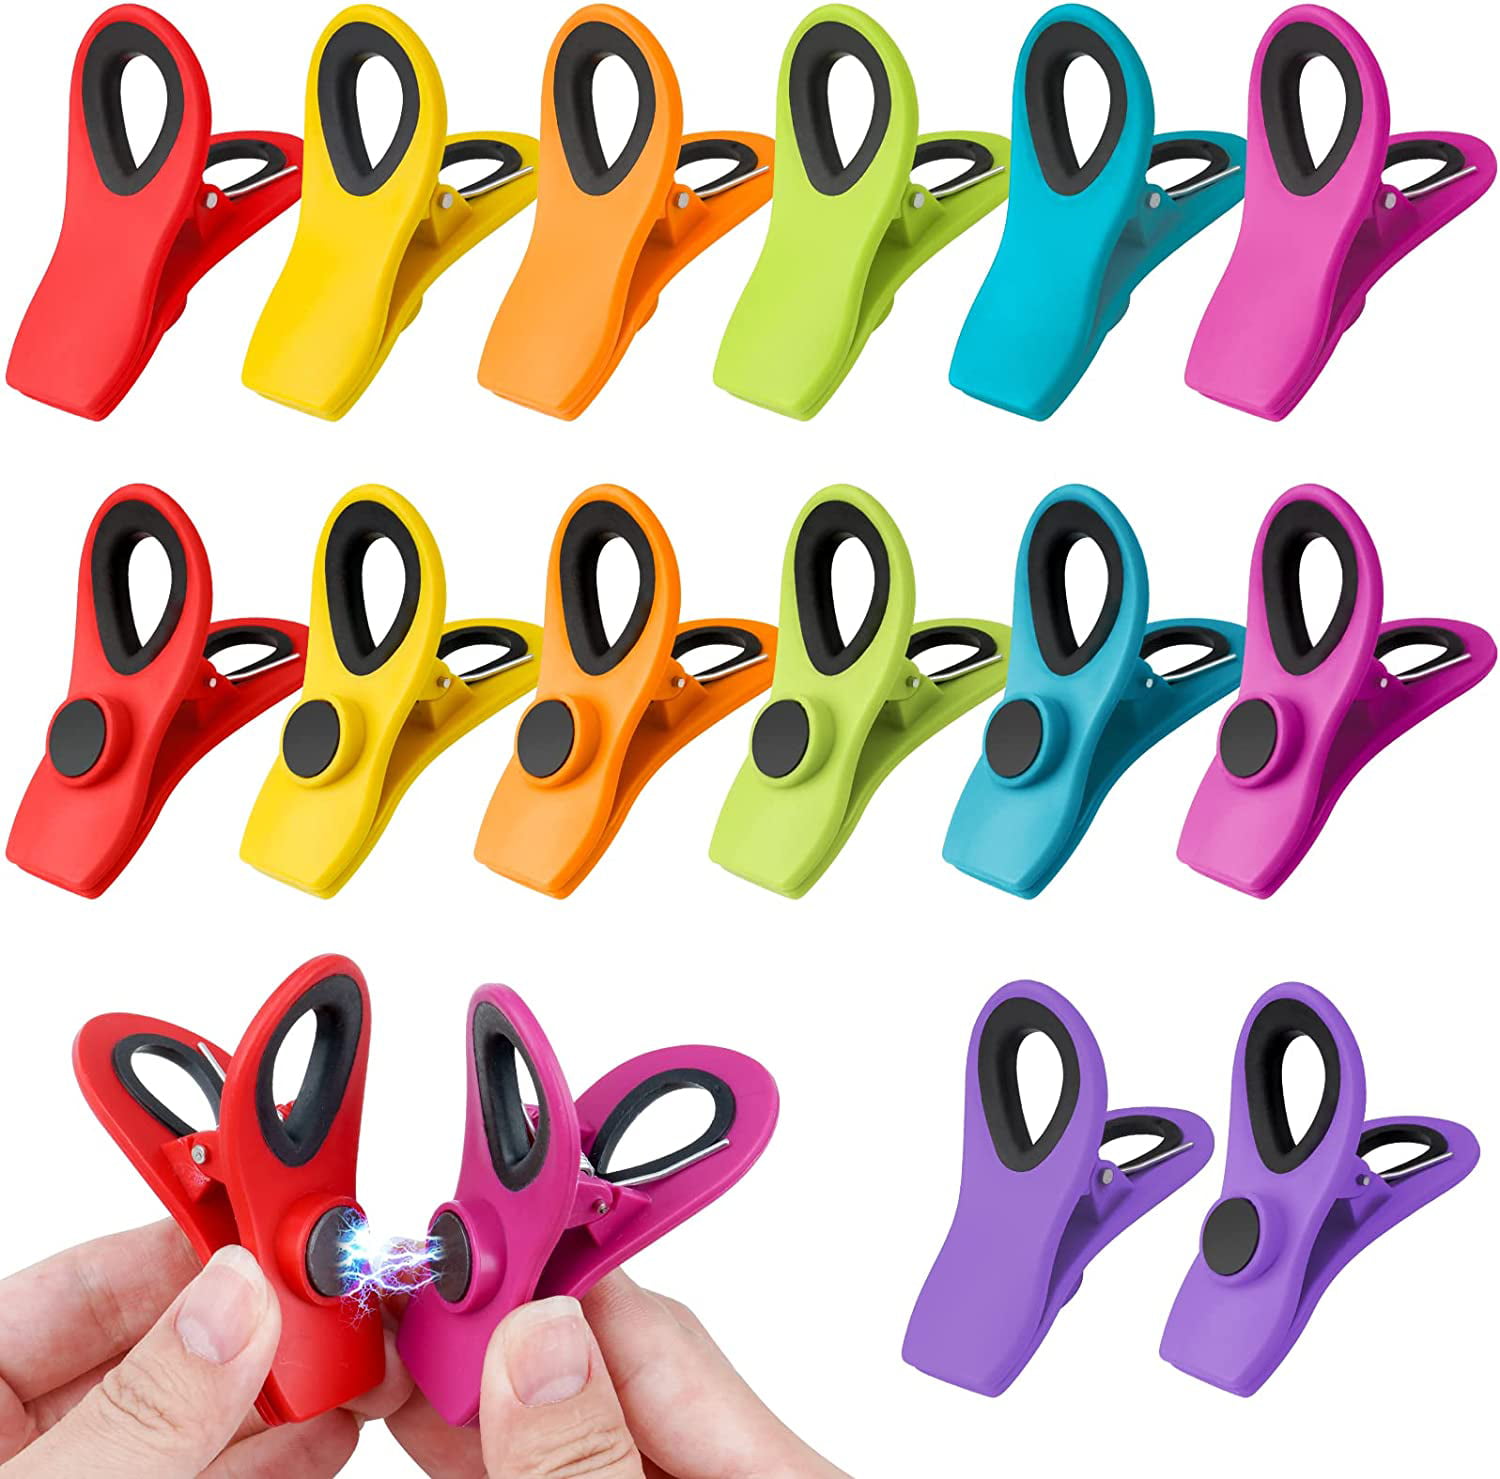 16 Pcs Bag Clips with Magnet - 8 Assorted Bright Colors Chip Clips Bag  Clips Food Clips. Magnetic Clips. Plastic Clips for Bread Bags. Snack Bags.  Food Packages (Translucent) 